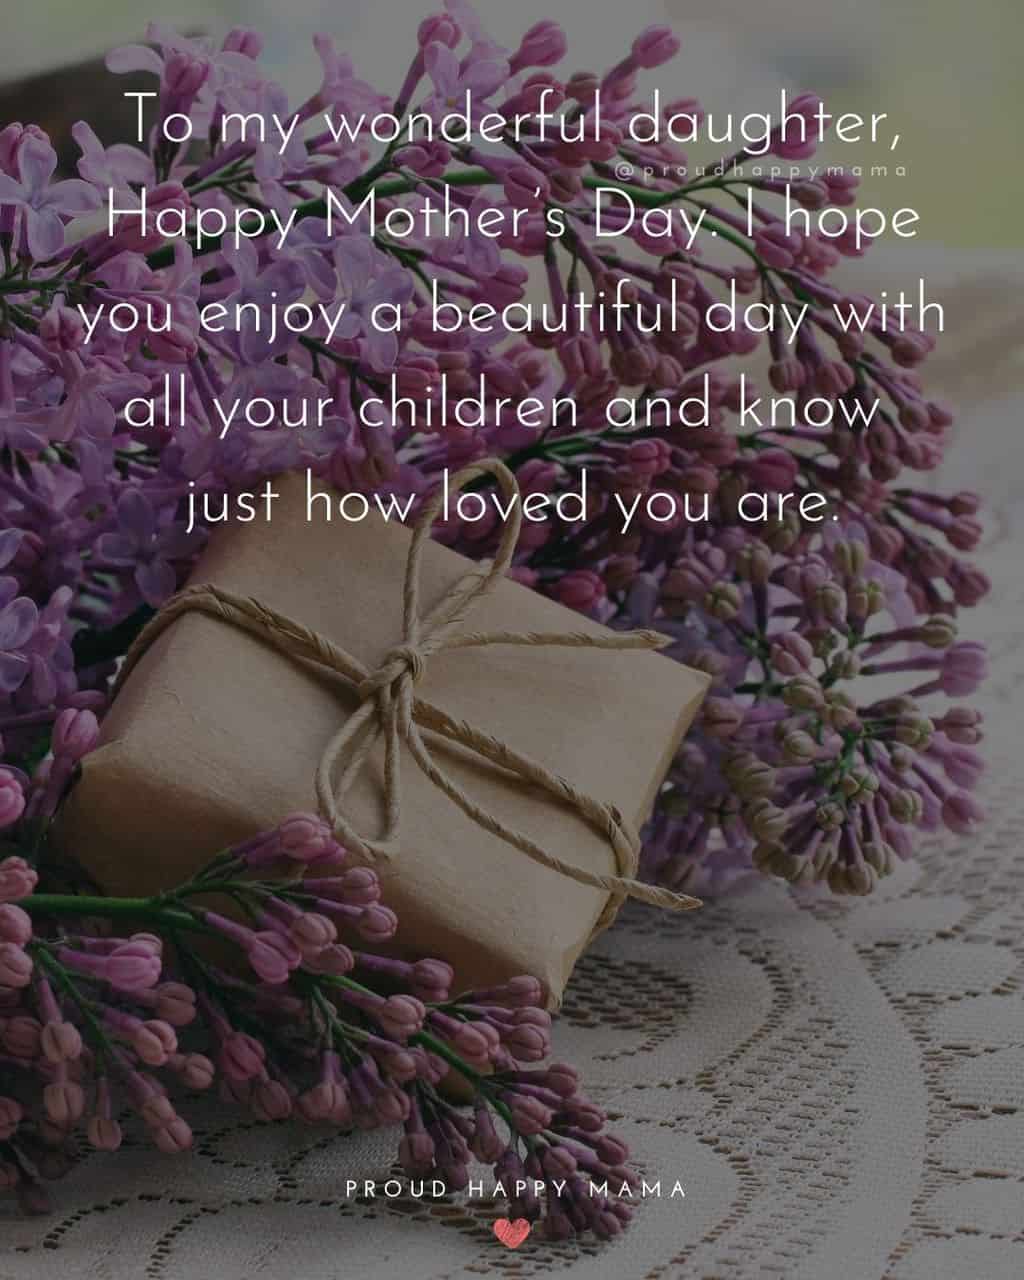 Happy Mothers Day Quotes To Daughter - To my wonderful daughter, Happy Mother’s Day. I hope you enjoy a beautiful day with all your